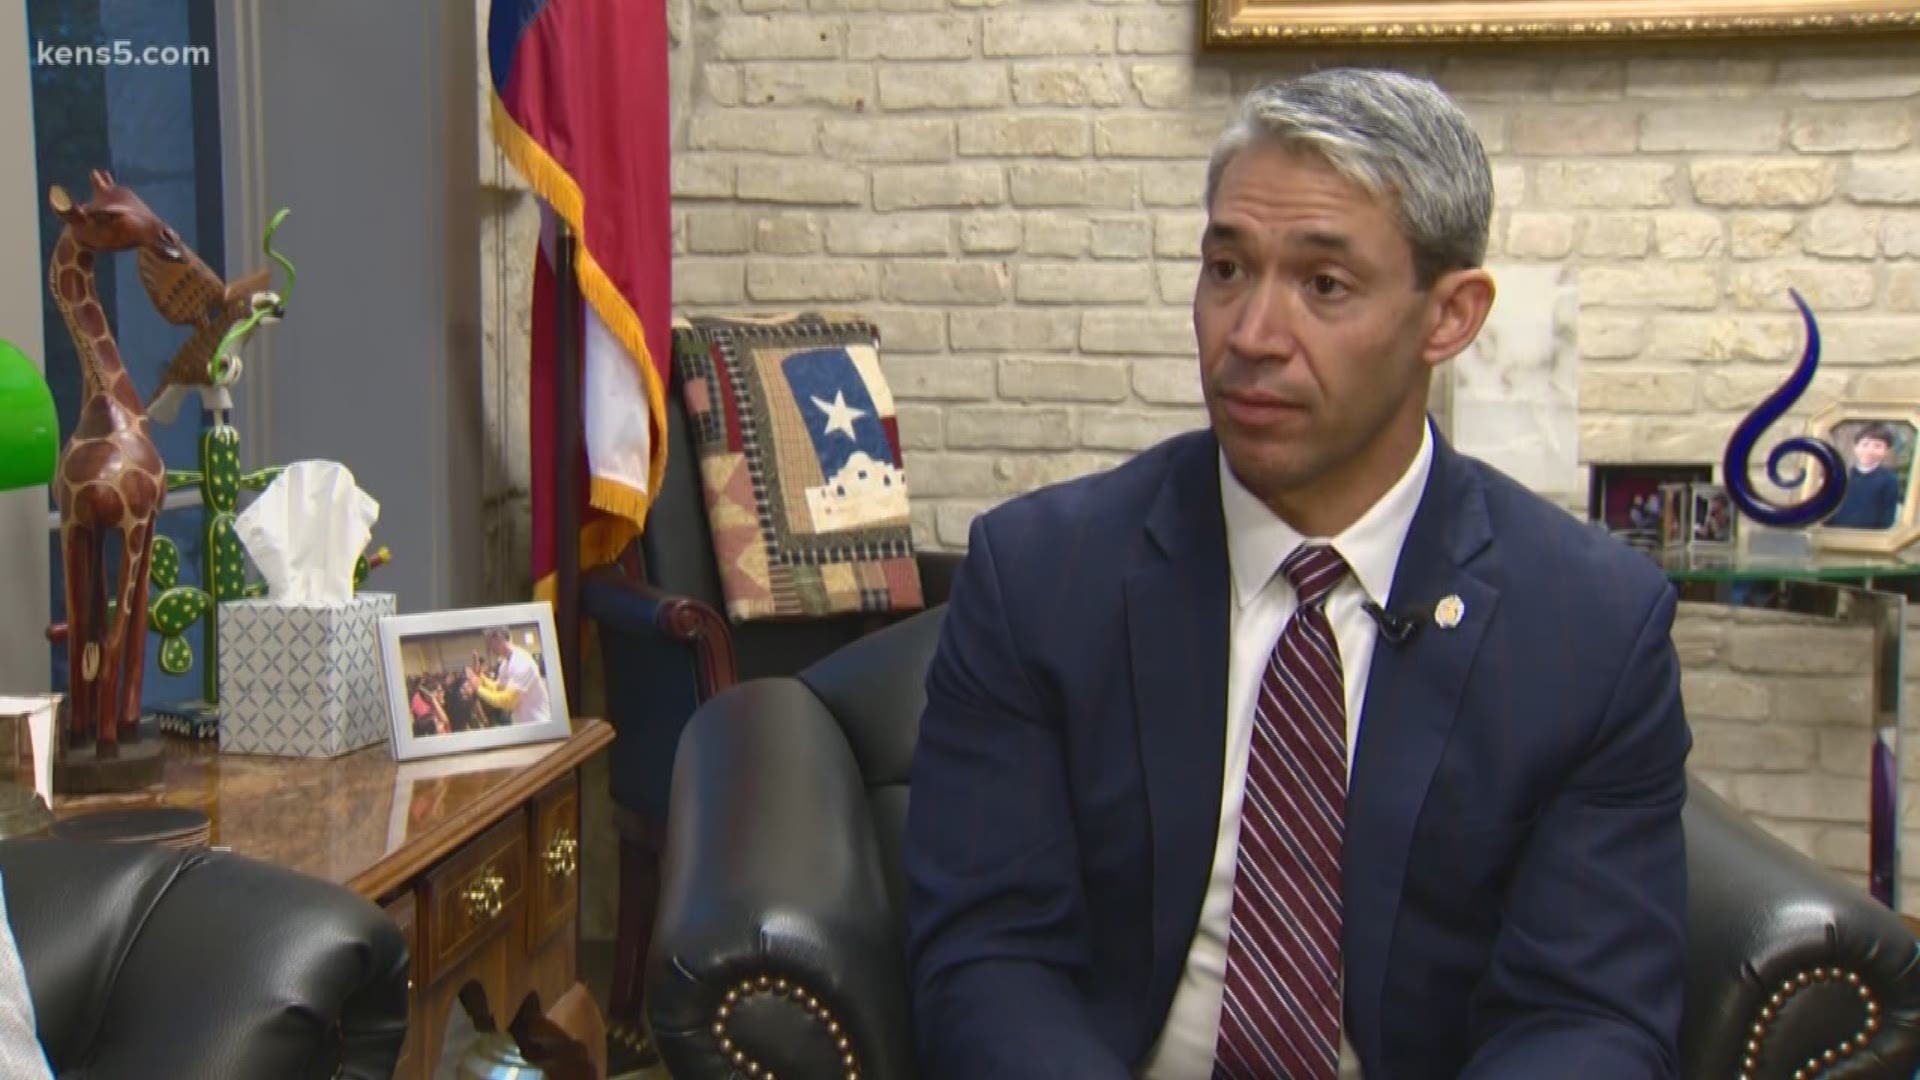 "We want to make sure that the risk of exposure remains low, and so we're going to utilize all of our authority to do that," said San Antonio mayor Ron Nirenberg.